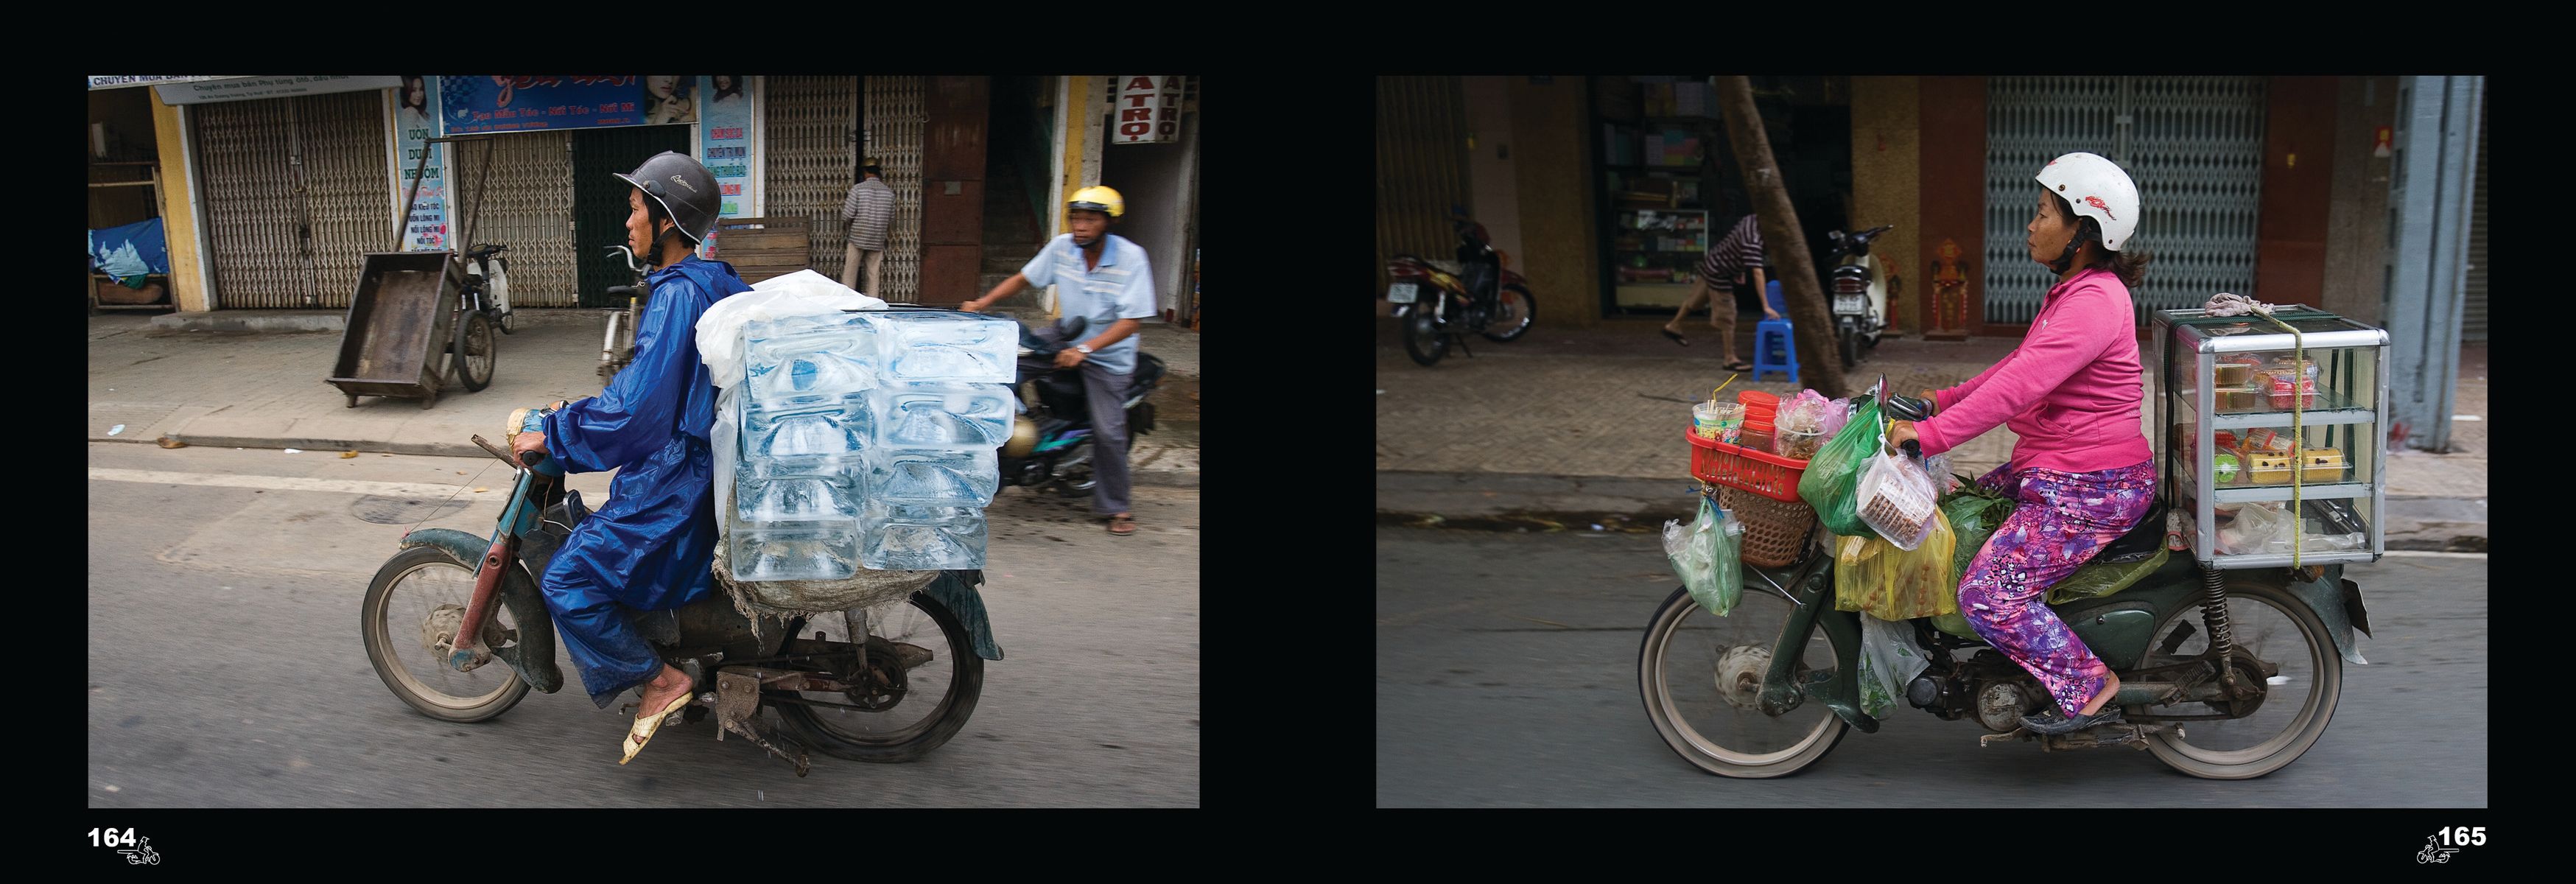 Vietnamese street vendor riding motorbike weighed down with dead chickens and geese, black border, Bikes of BURDEN in white font to upper right.